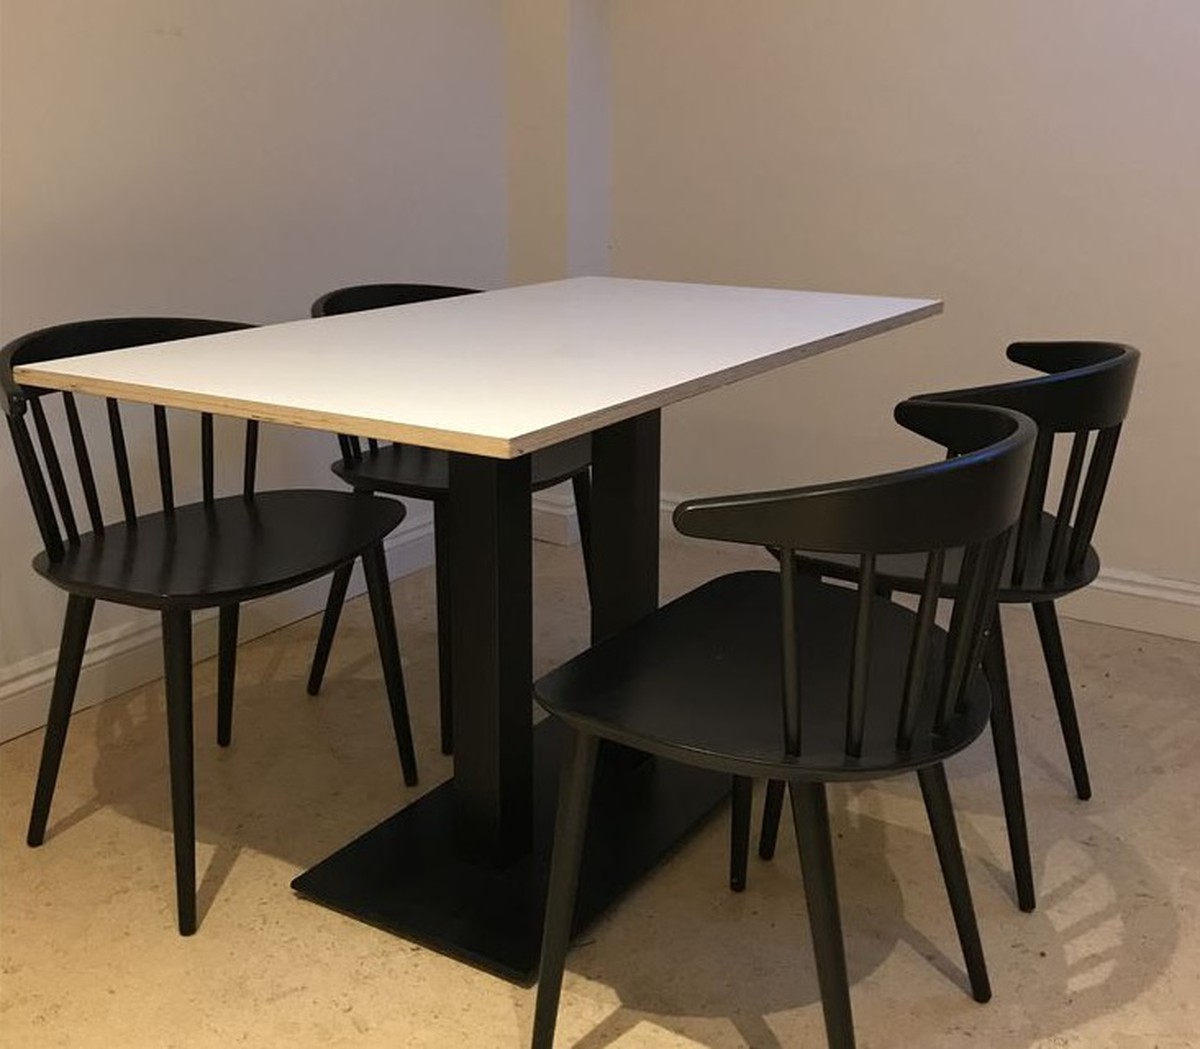 Secondhand Chairs And Tables Restaurant Or Cafe Tables 11x Formica Alpino White Faced Birch Plywood Table Tops Solid Cast Iron Bases Various Sizes Herefordshire